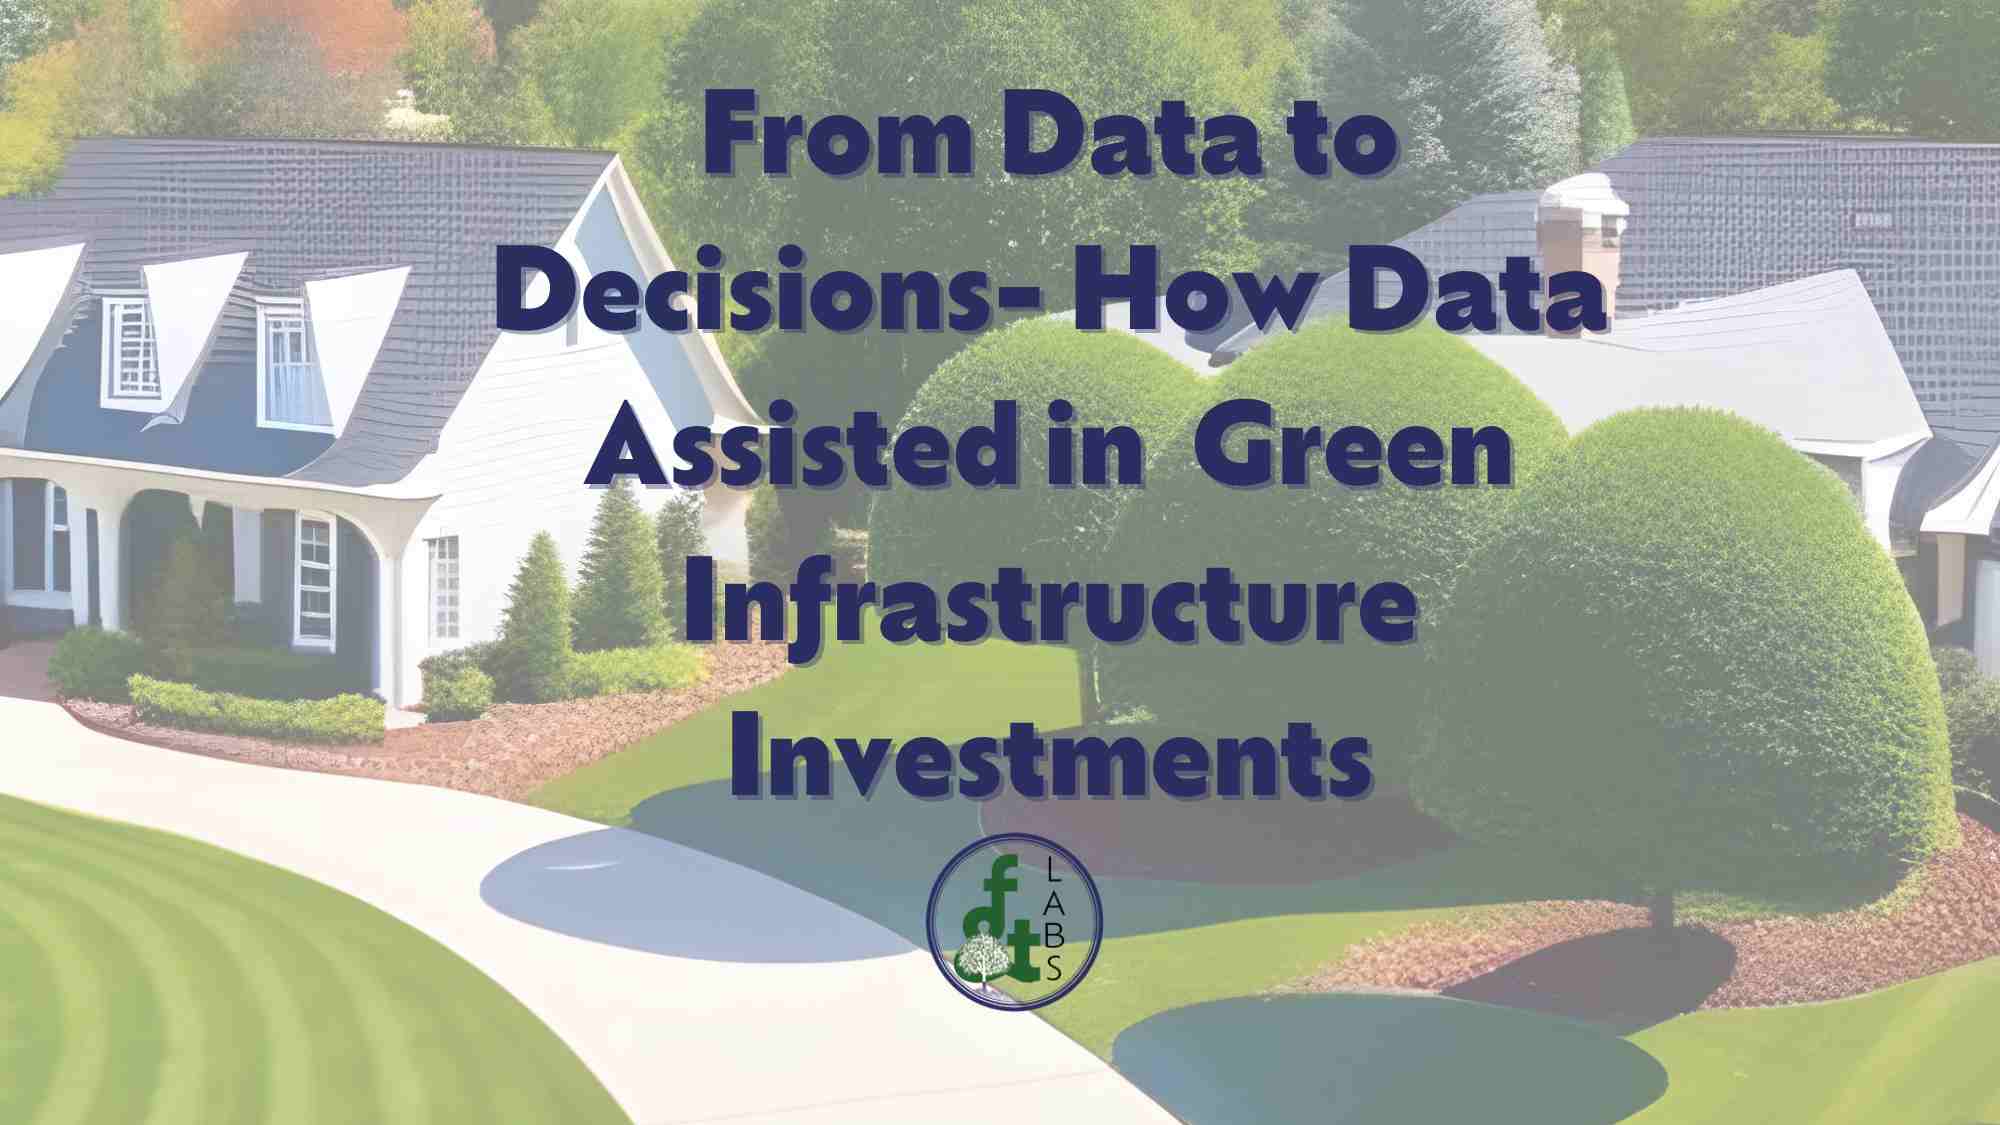 Process Transformation with GIS an image of green infrastructure with GIS